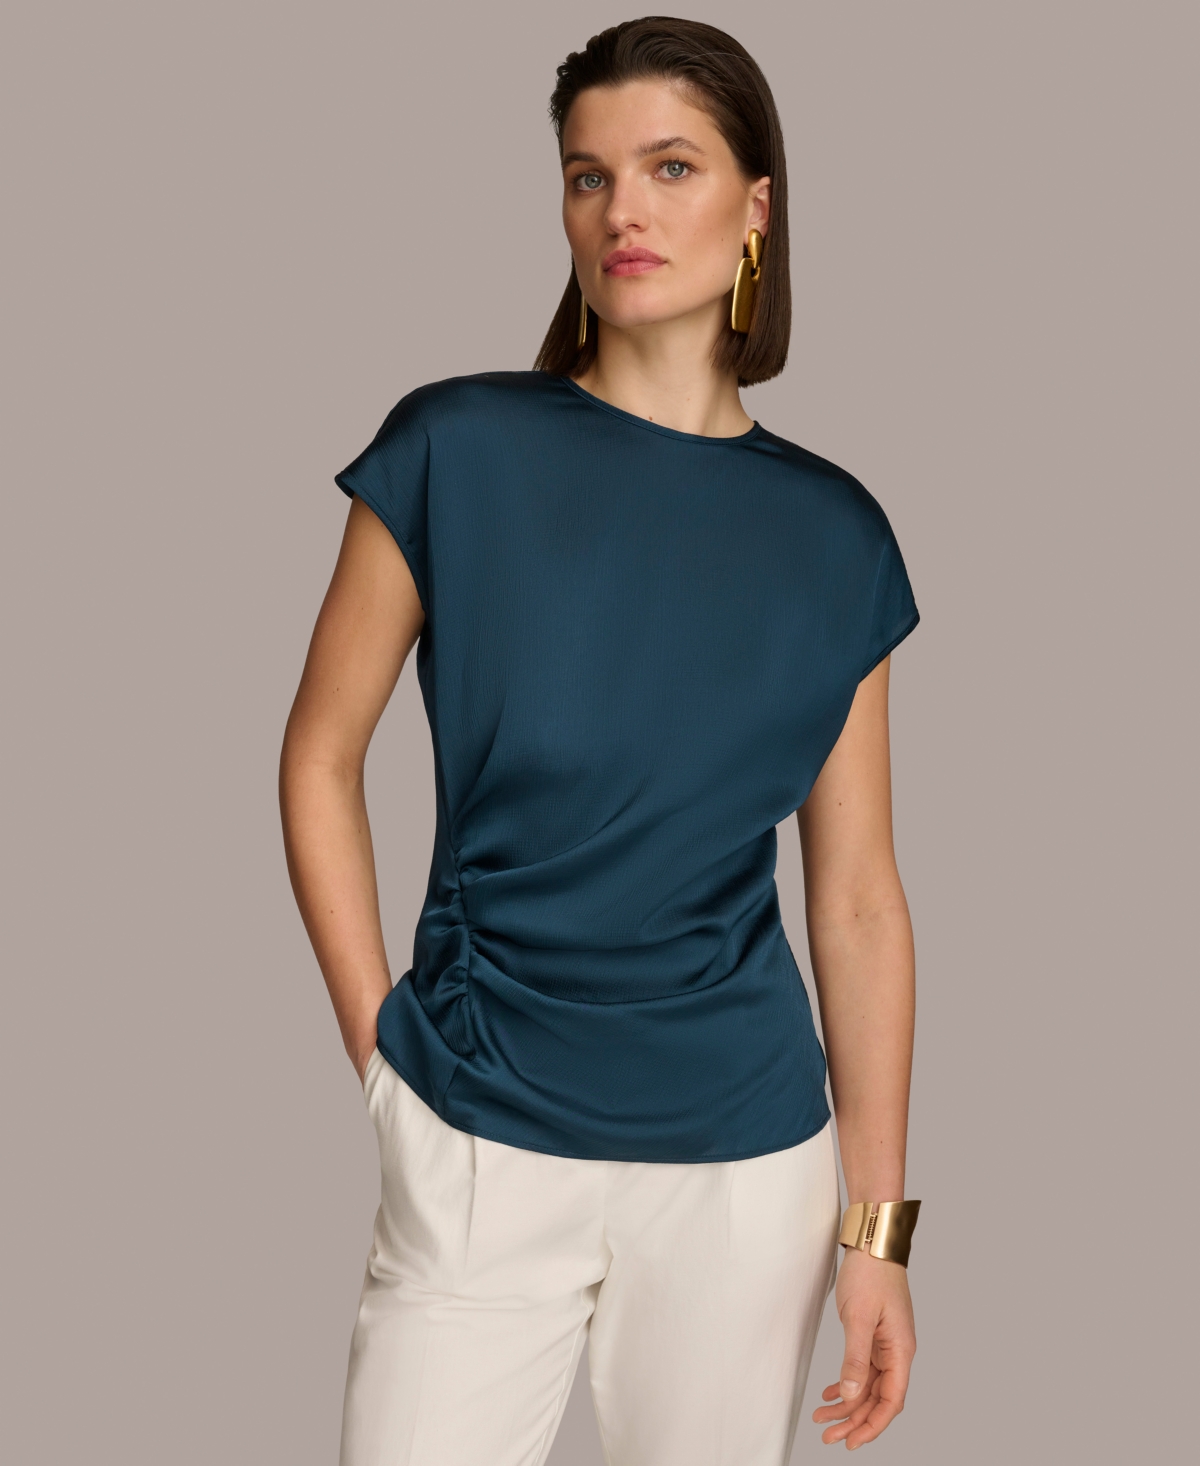 Women's Short Sleeve Side-Ruched Top - Tide Navy